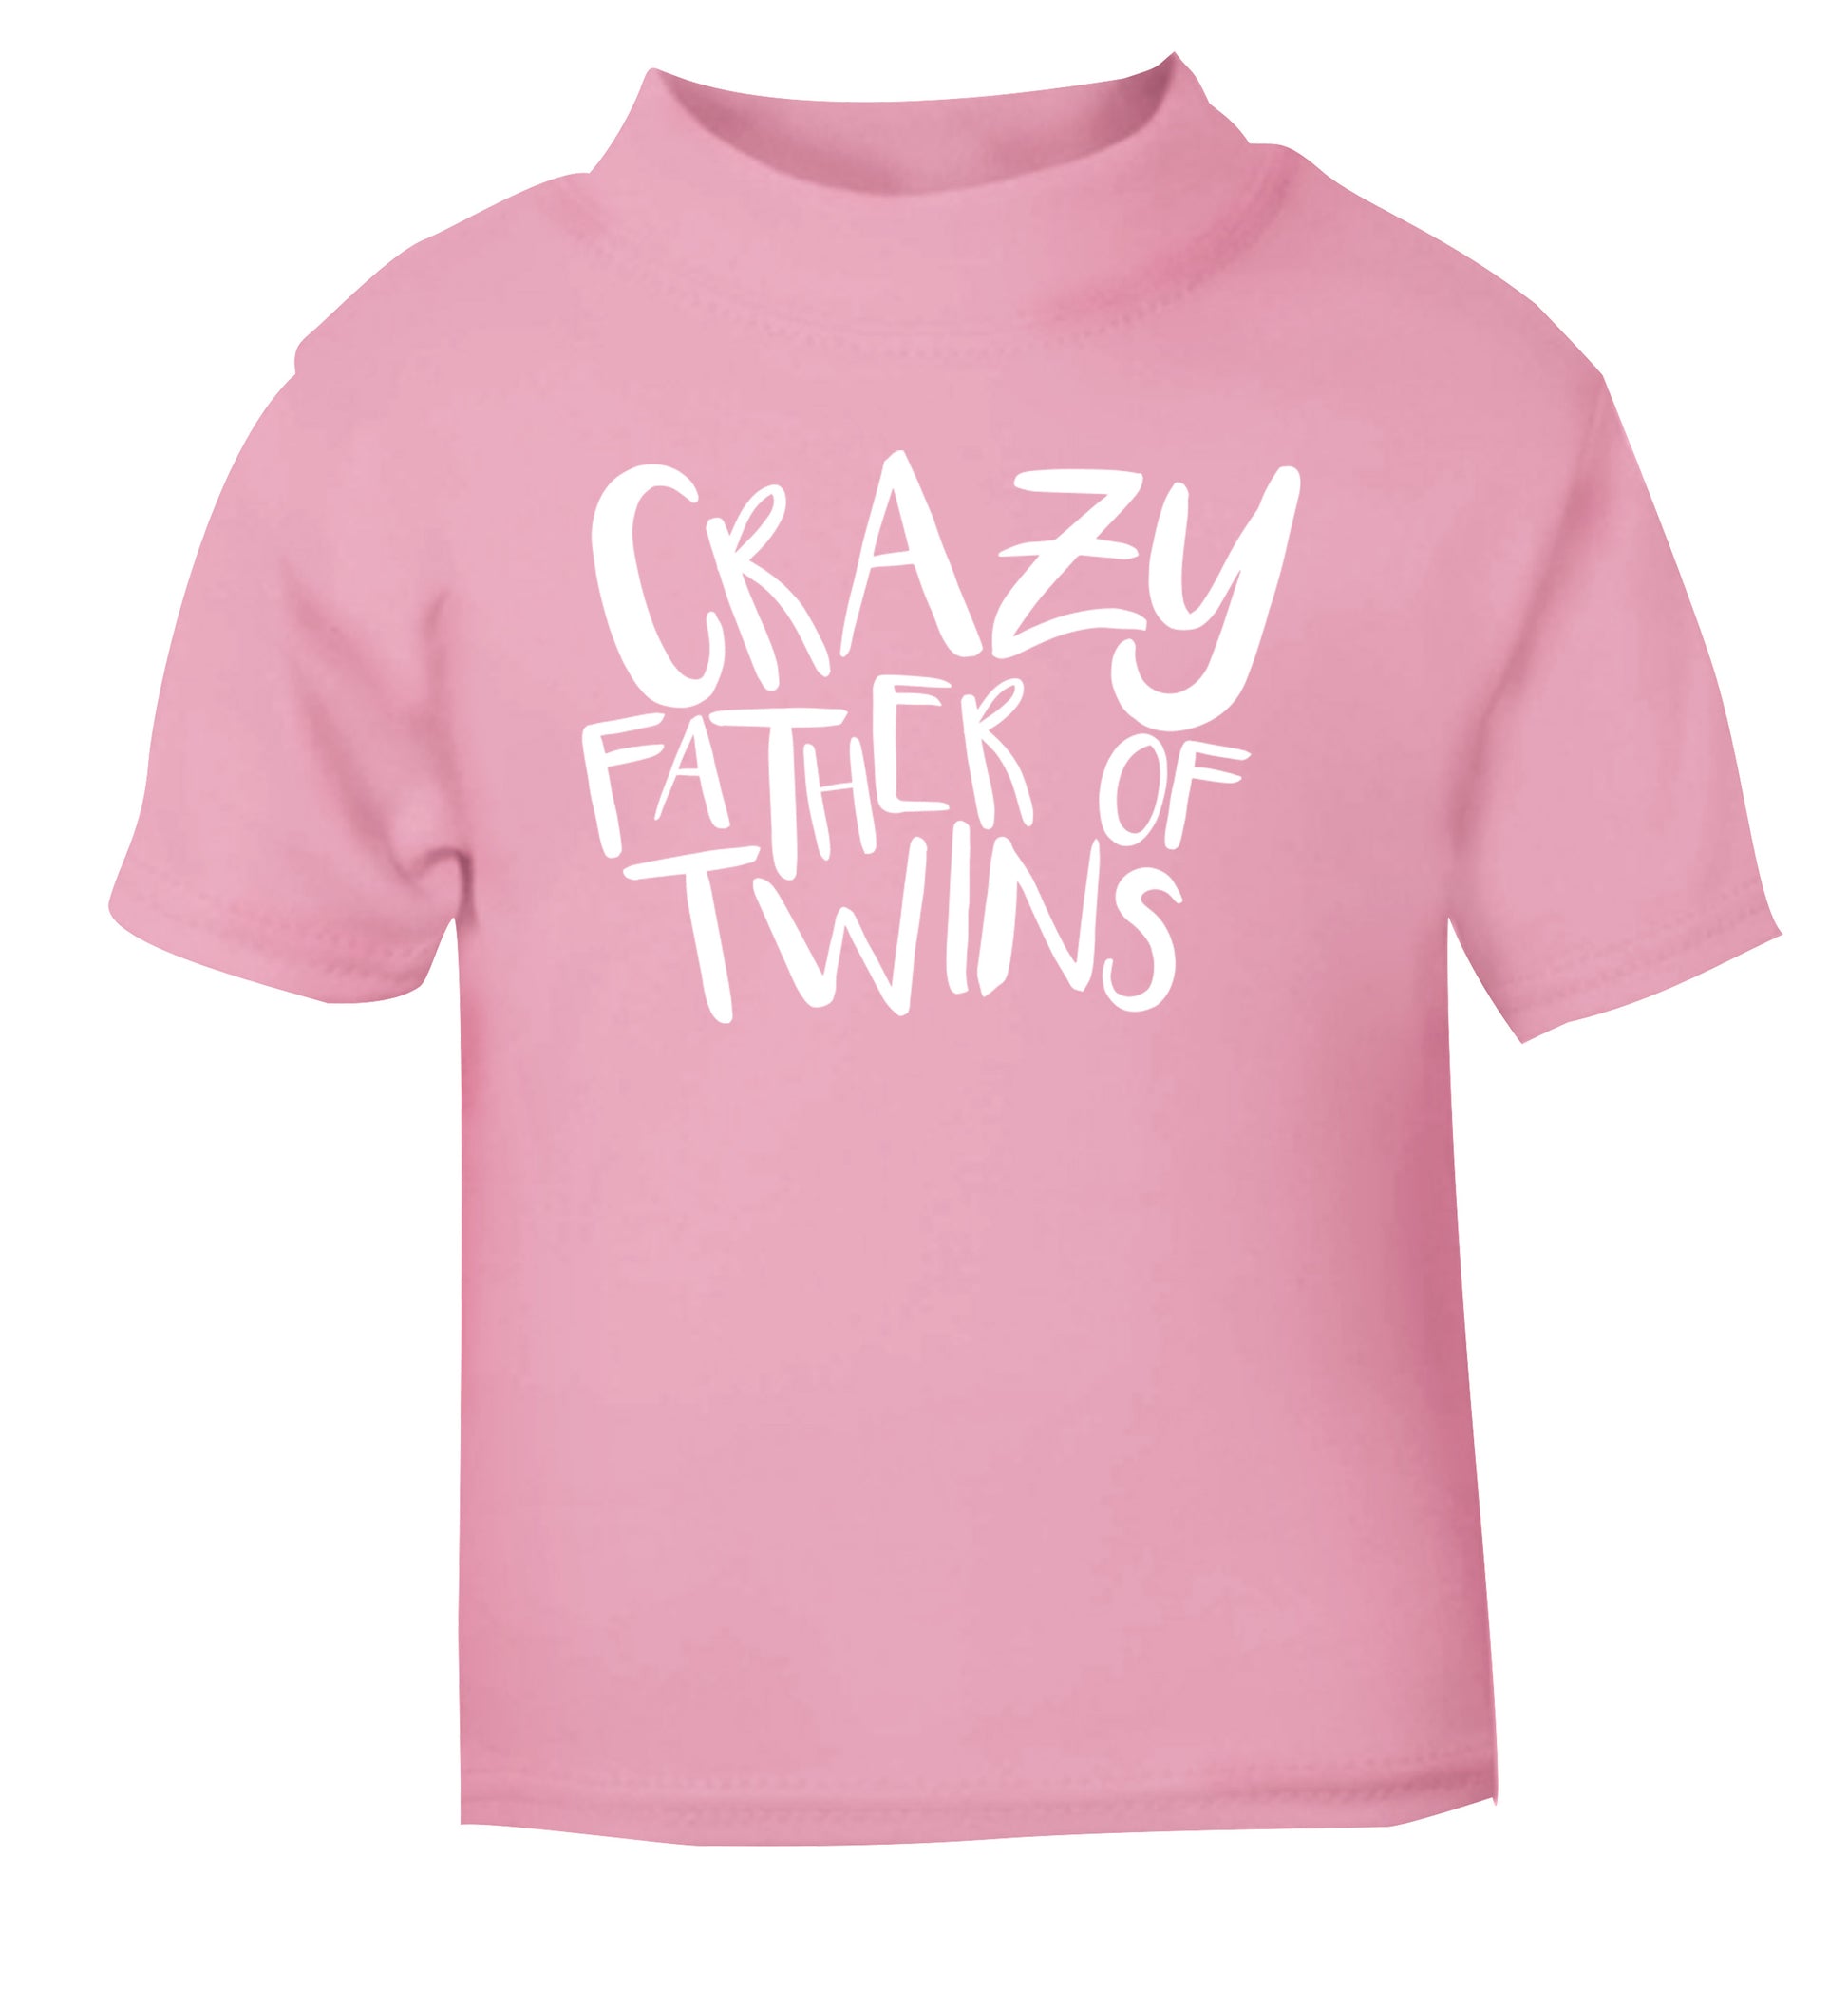 Crazy father of twins light pink Baby Toddler Tshirt 2 Years